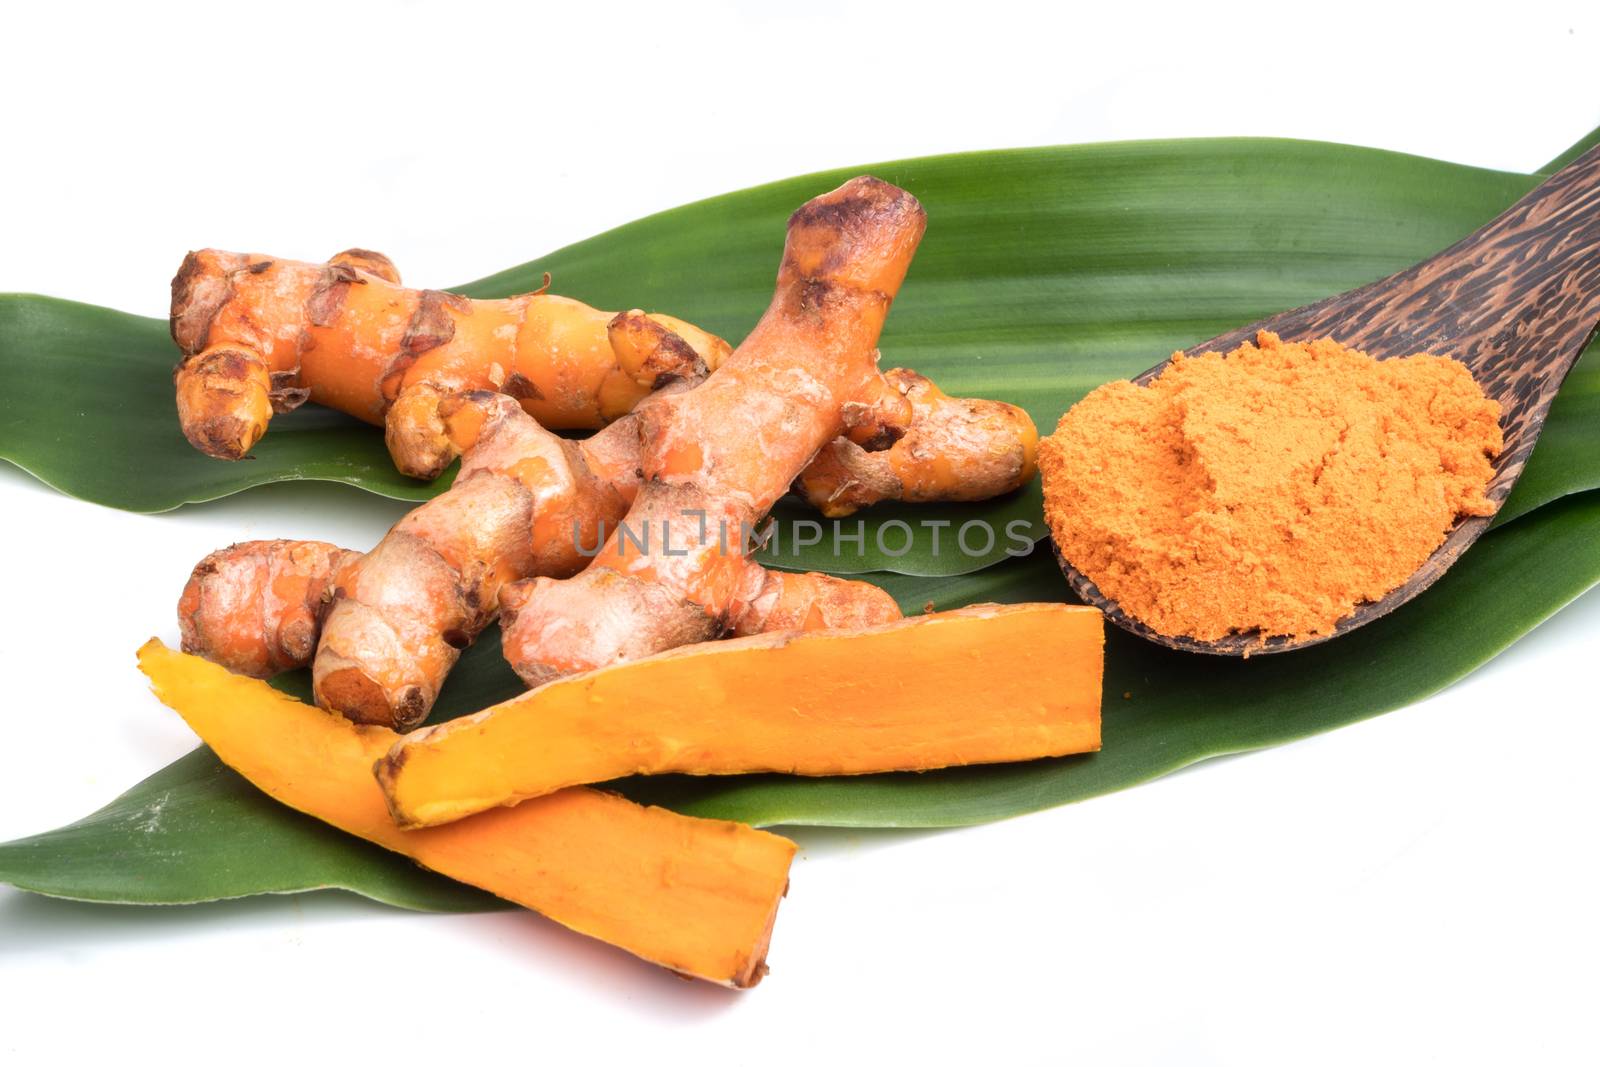 Turmeric roots with turmeric powder on green leaf over white background.